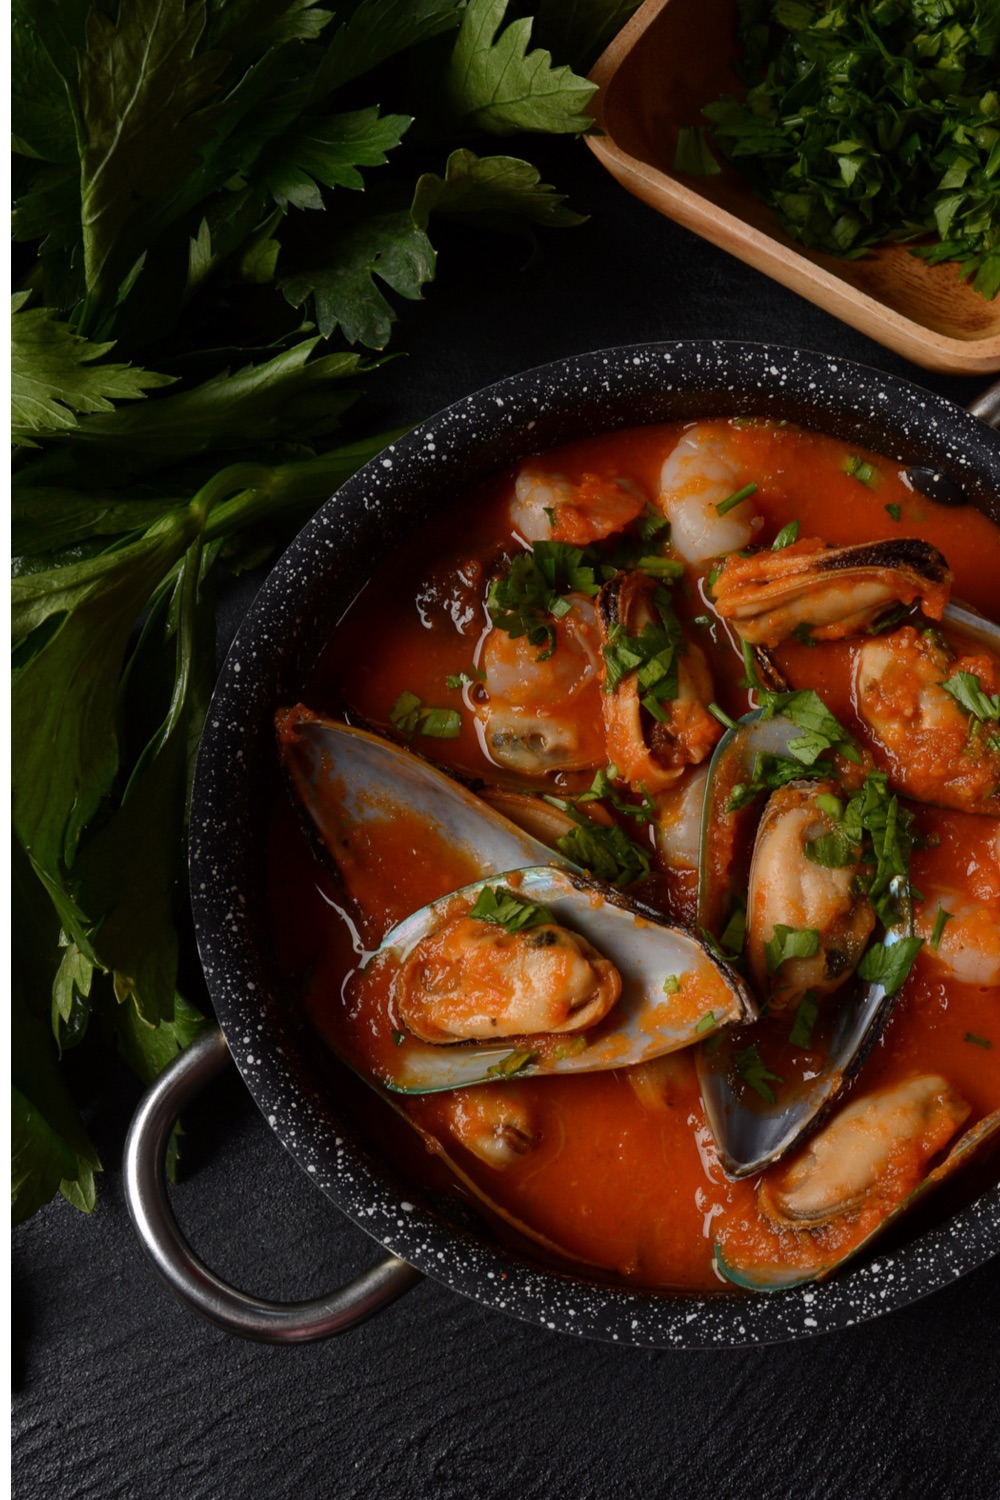 Variation of Mexican fish stew with shellfish.